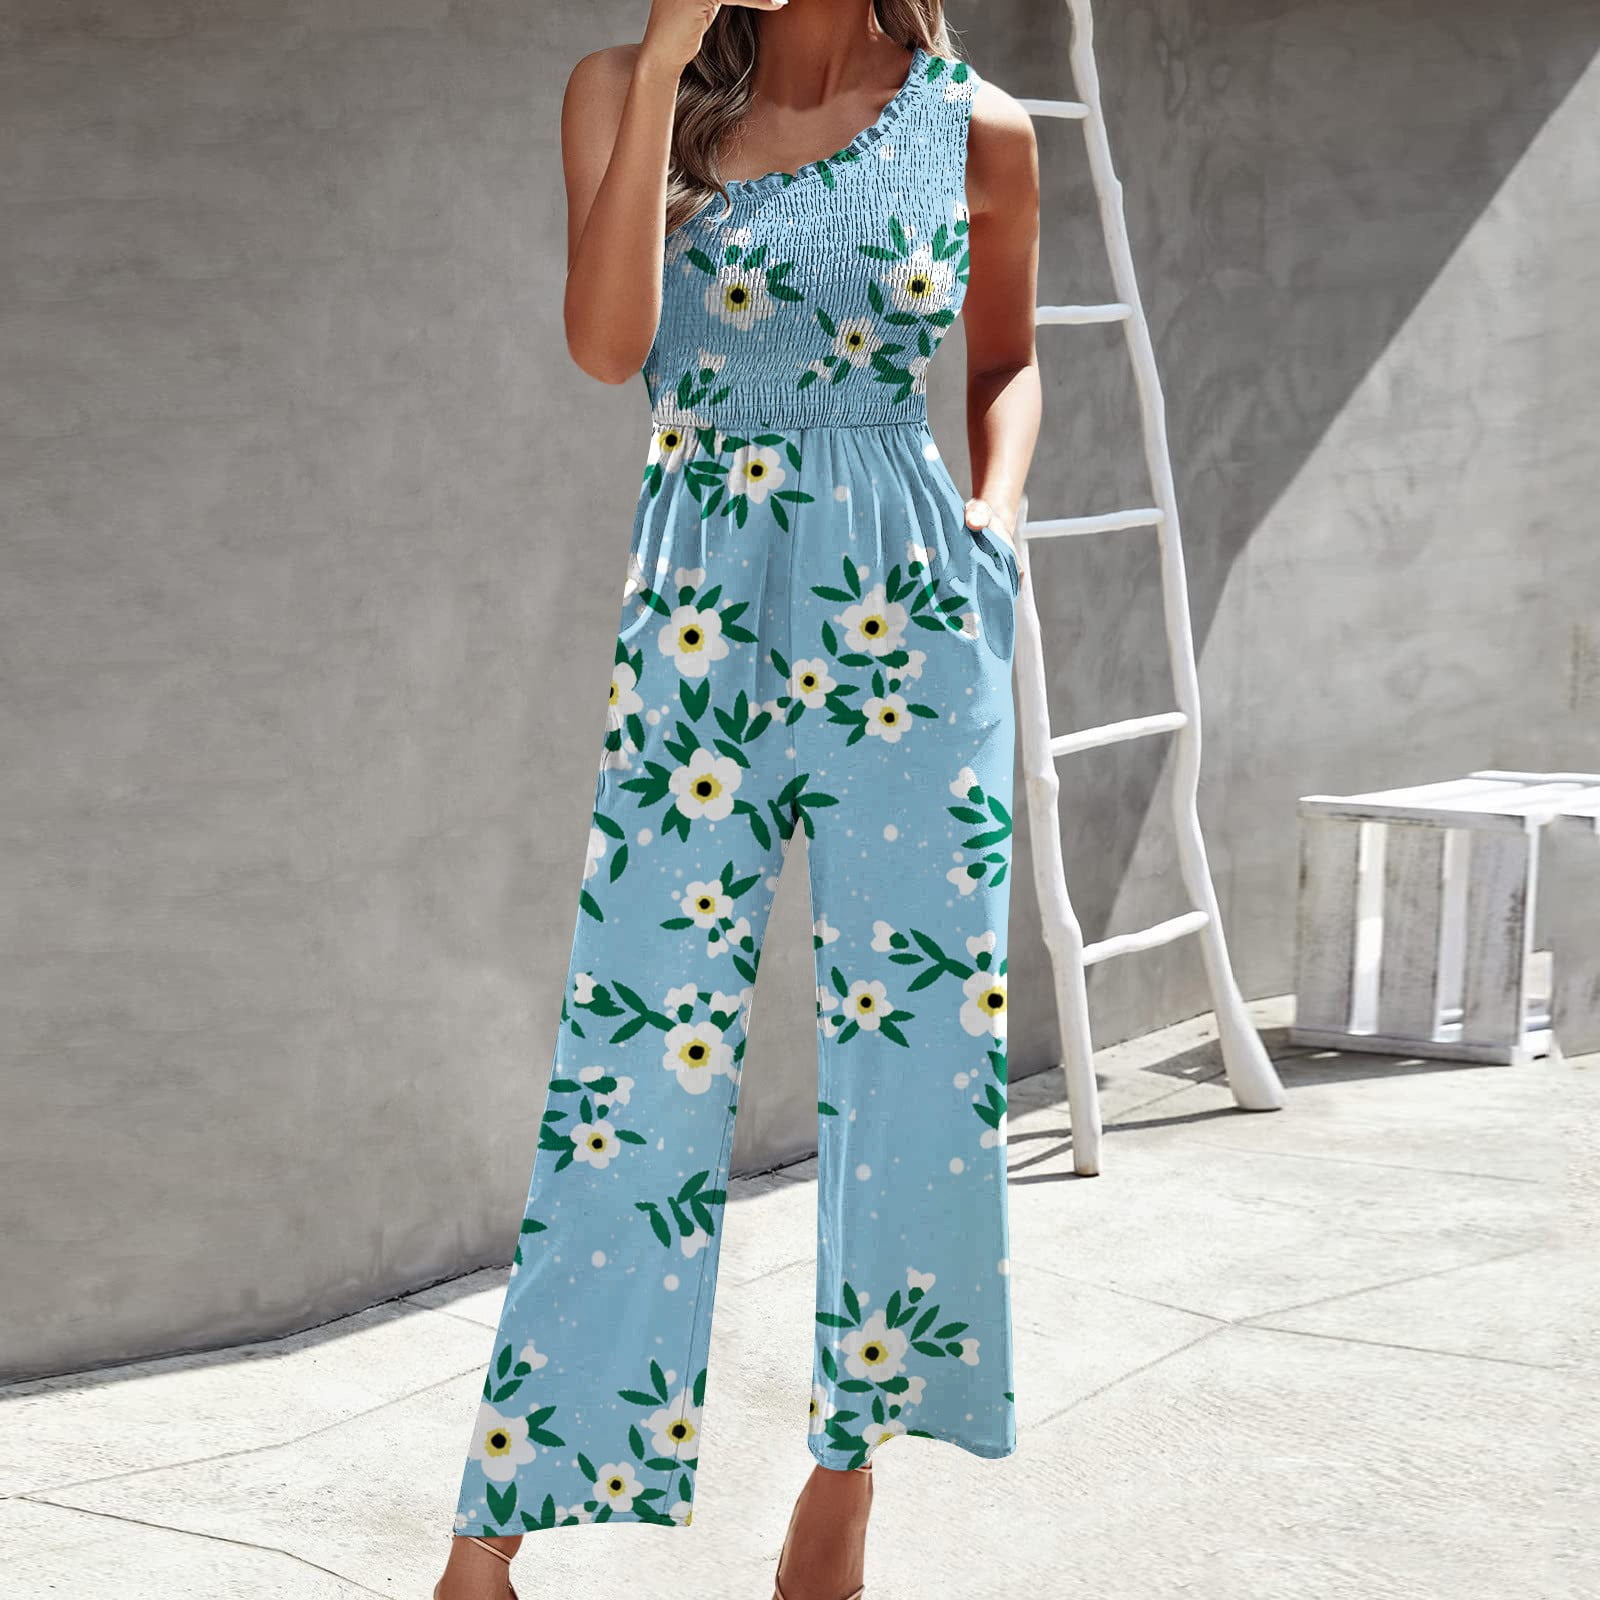 Plausible enfermo Contando insectos One Piece Jumpsuits for Women Women's Fashion Printed Single Shoulder Strap  Sleeveless Packets Jumpsuit Enterizos De Mujer Elegantes Largos -  Walmart.com